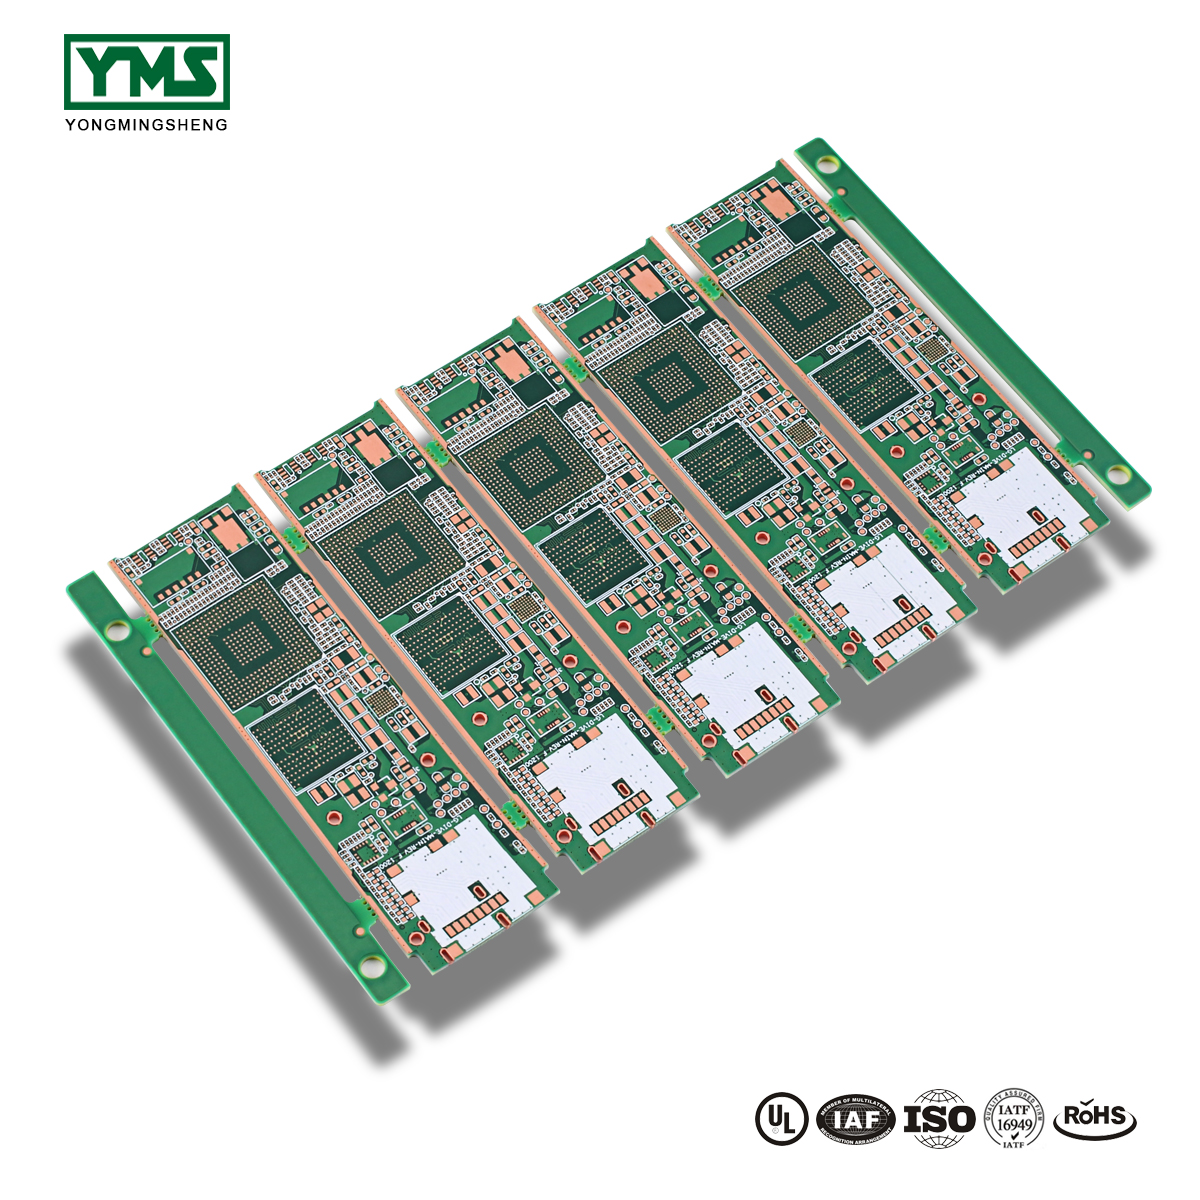 China Factory for Small Volume Pcb - 12Layer Immersion Gold HDI | YMS PCB – Yongmingsheng